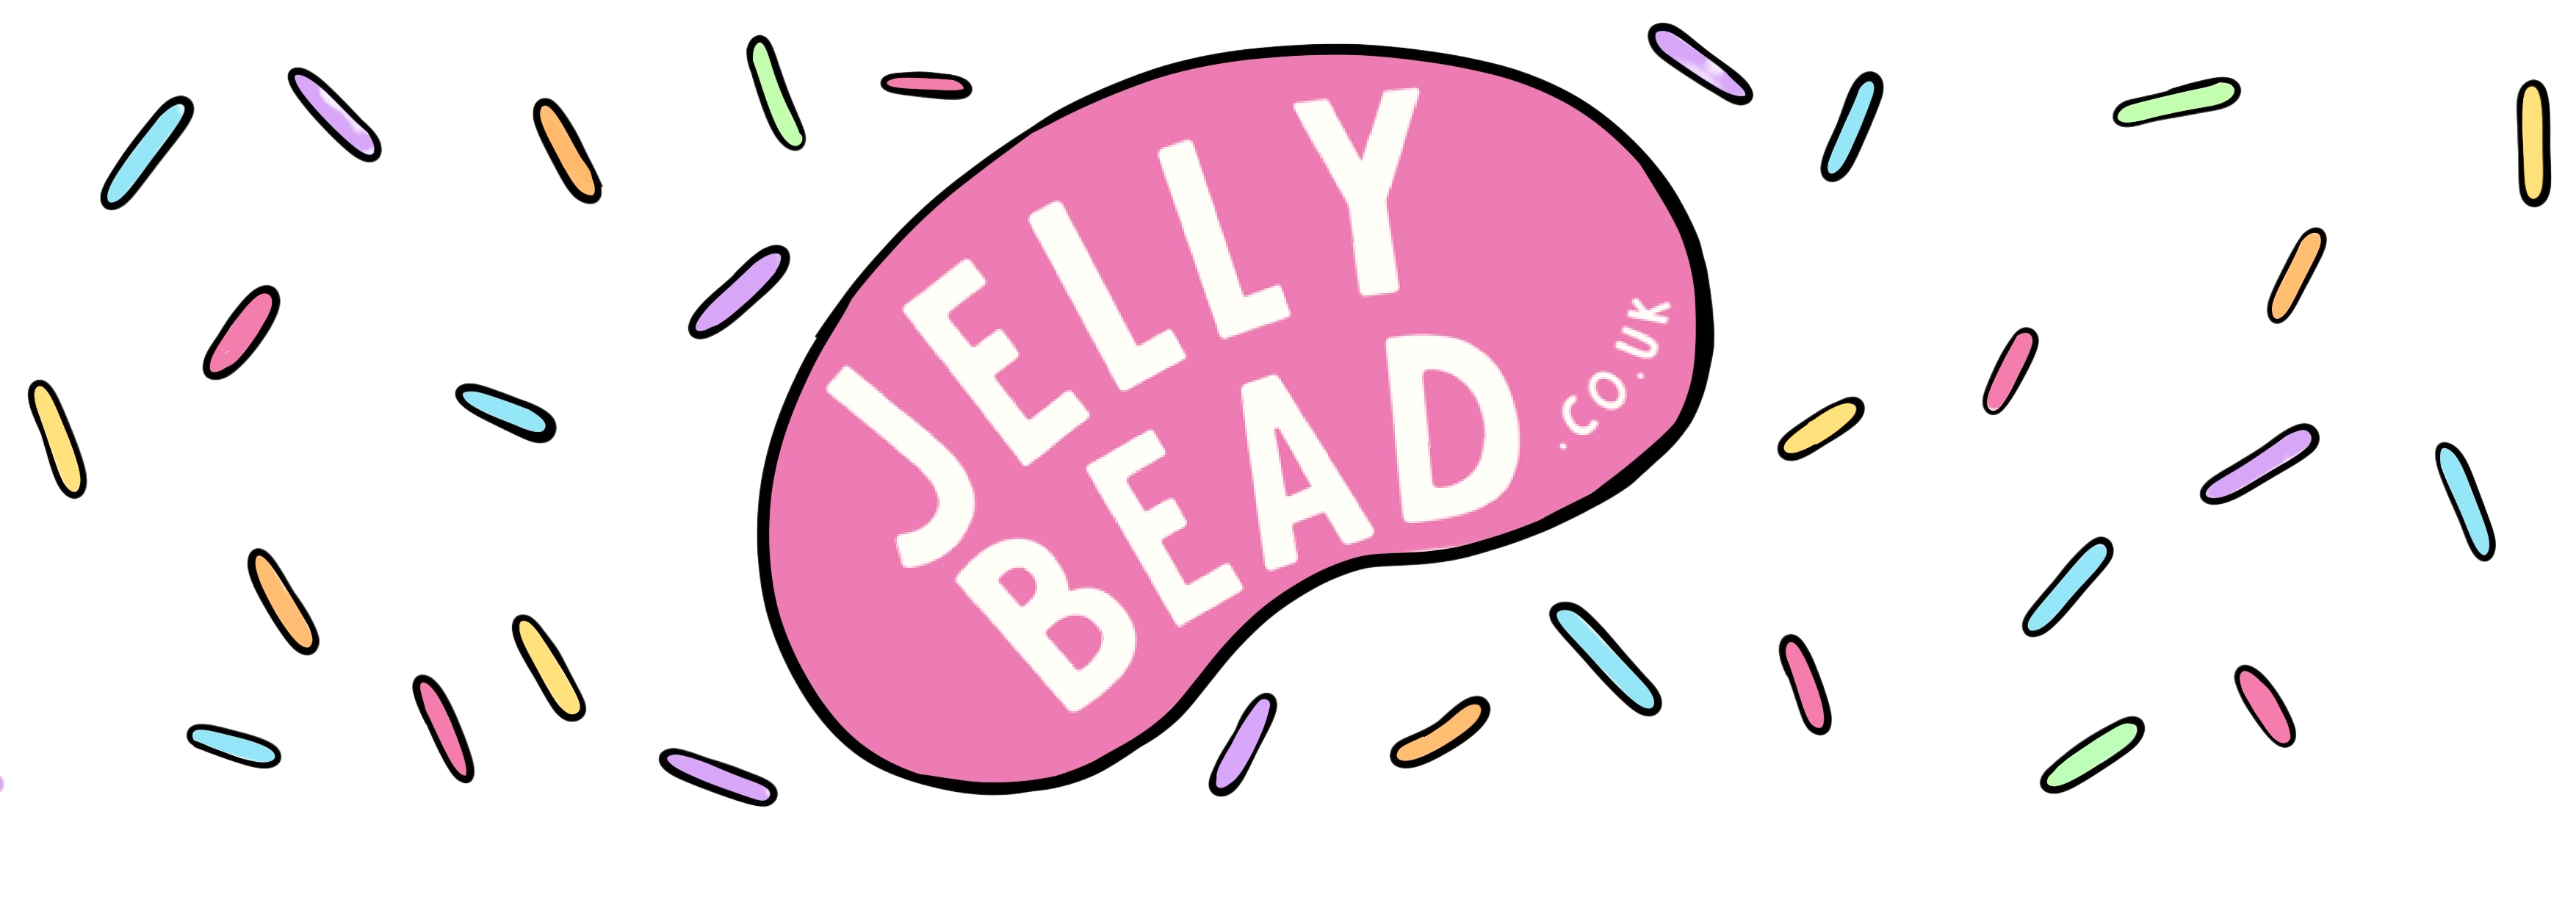 Jelly bead Childchildrens Slime and Craft parties and workshops